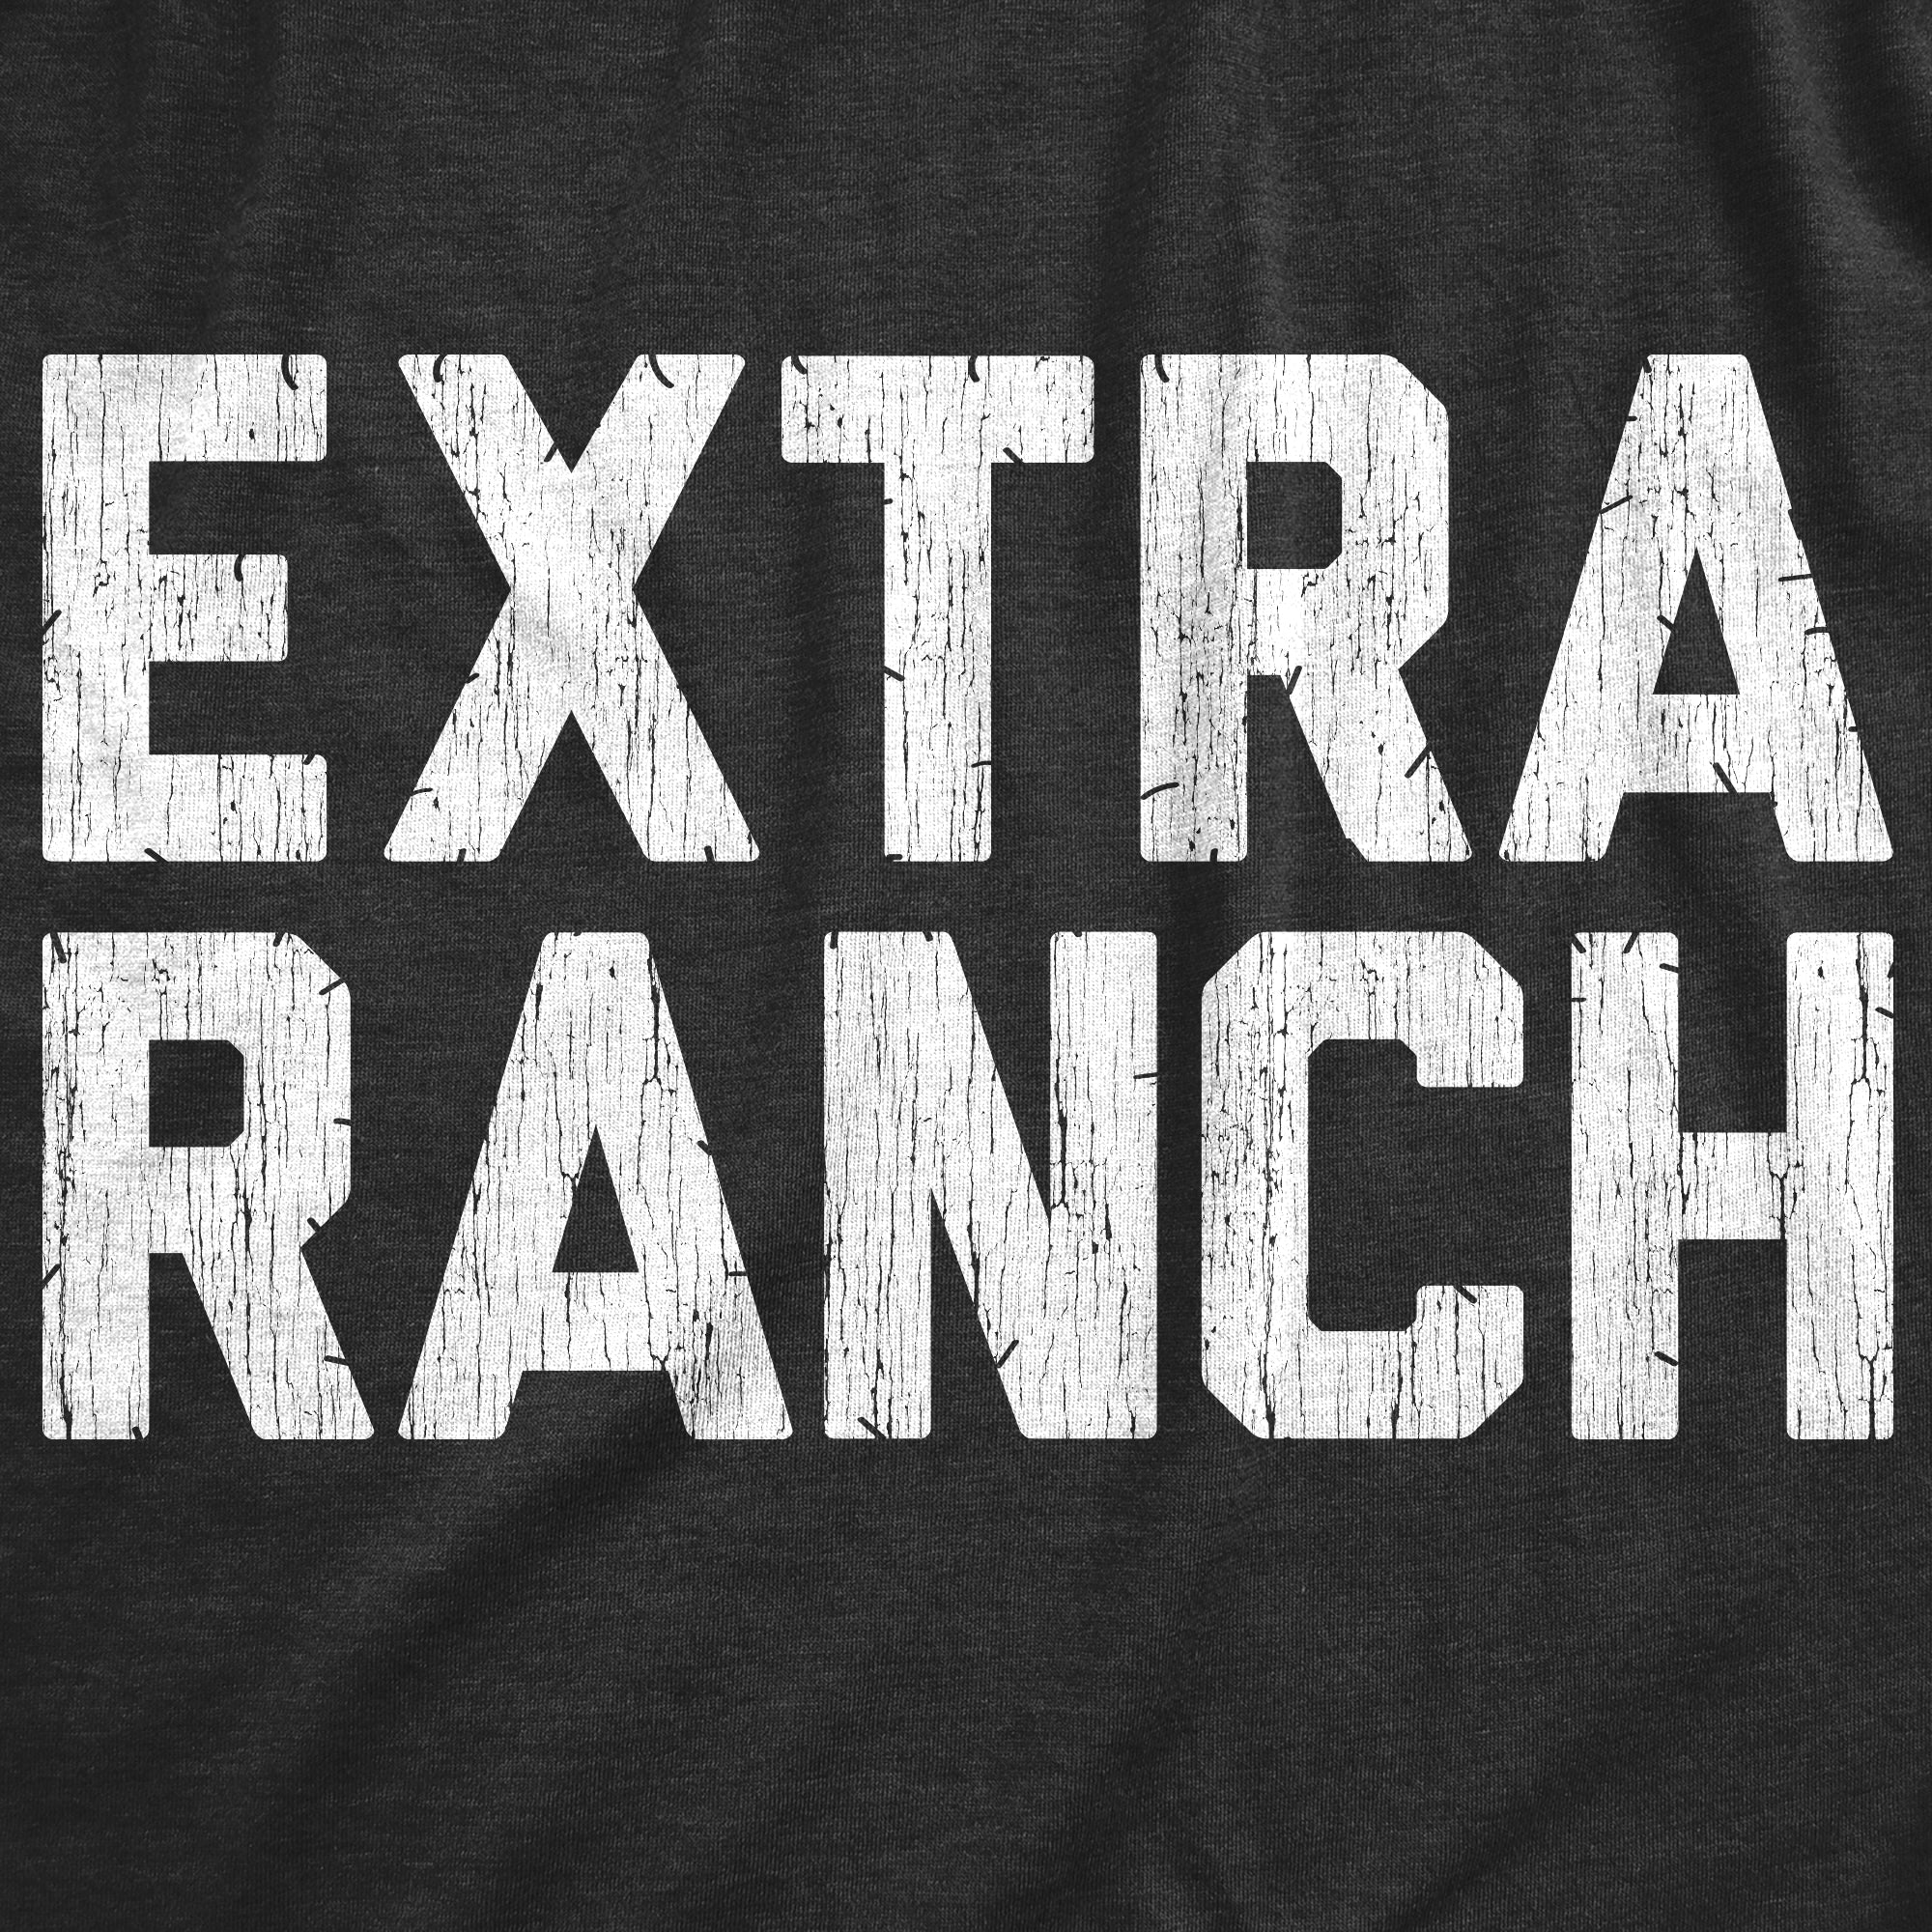 Funny Heather Black - RANCH Extra Ranch Mens T Shirt Nerdy Food Tee